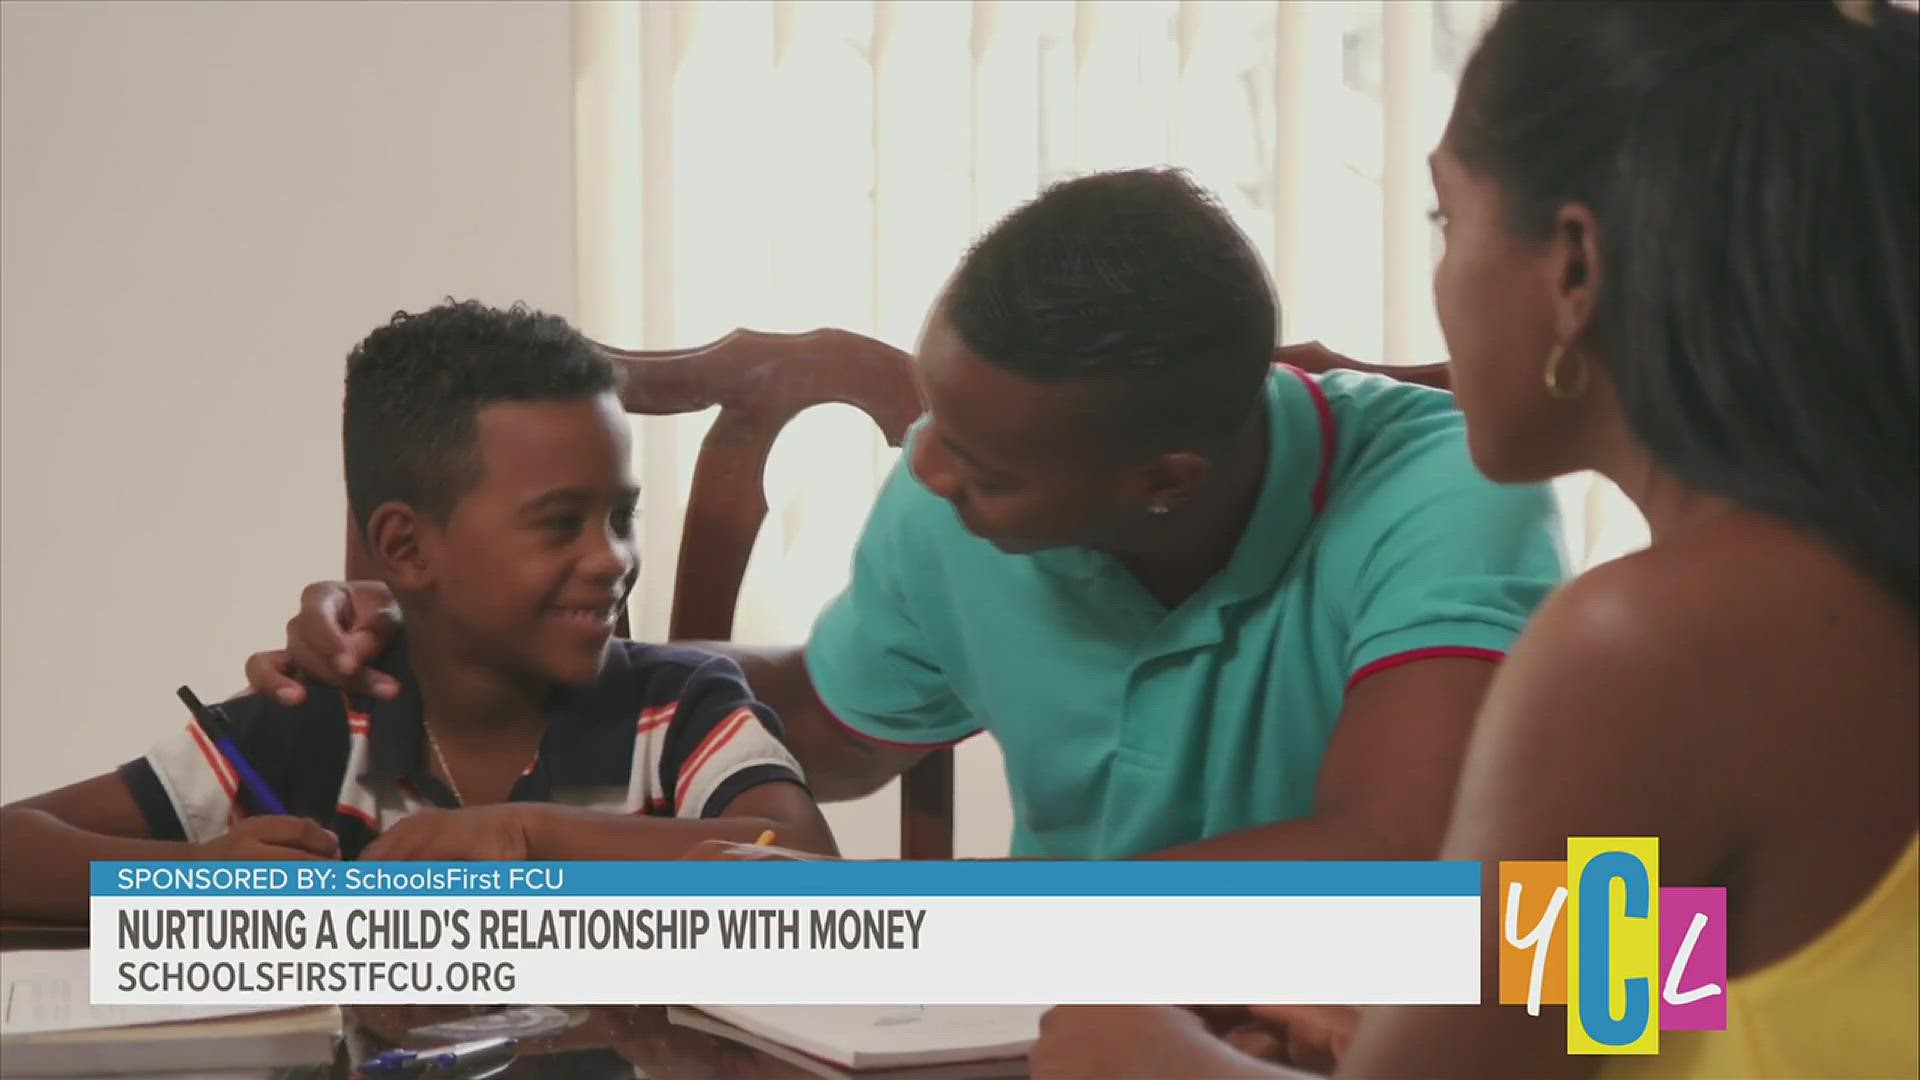 Establishing a good relationship with money can help children in the long run. See what you can do to help. This segment is paid by SchoolsFirst FCU.